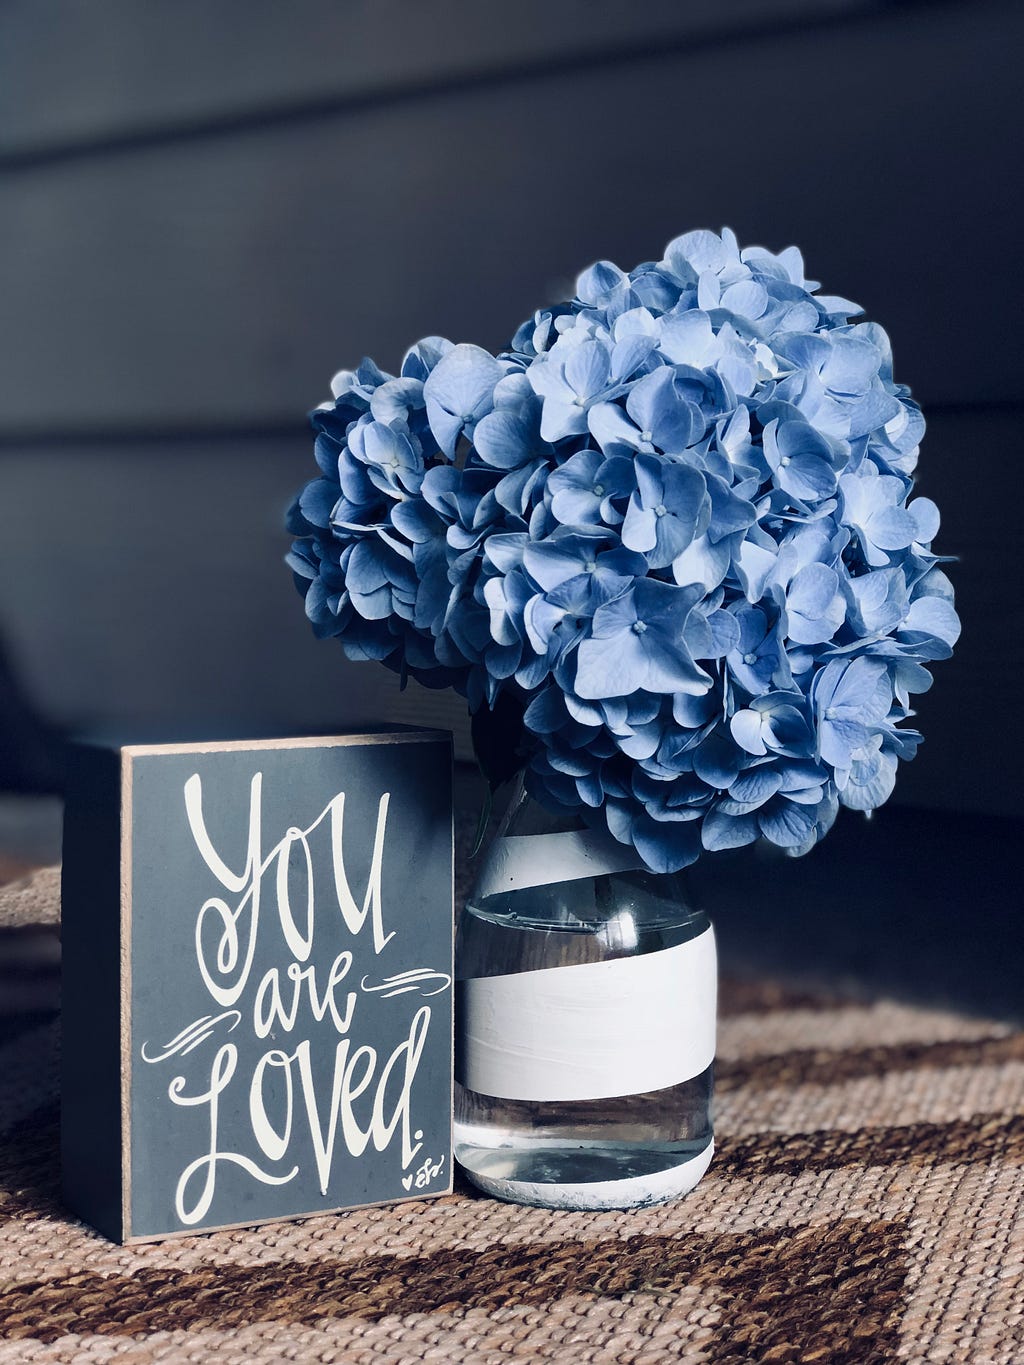 A tiny vase with blue flowers, and a card kept right next to it saying — You are loved.